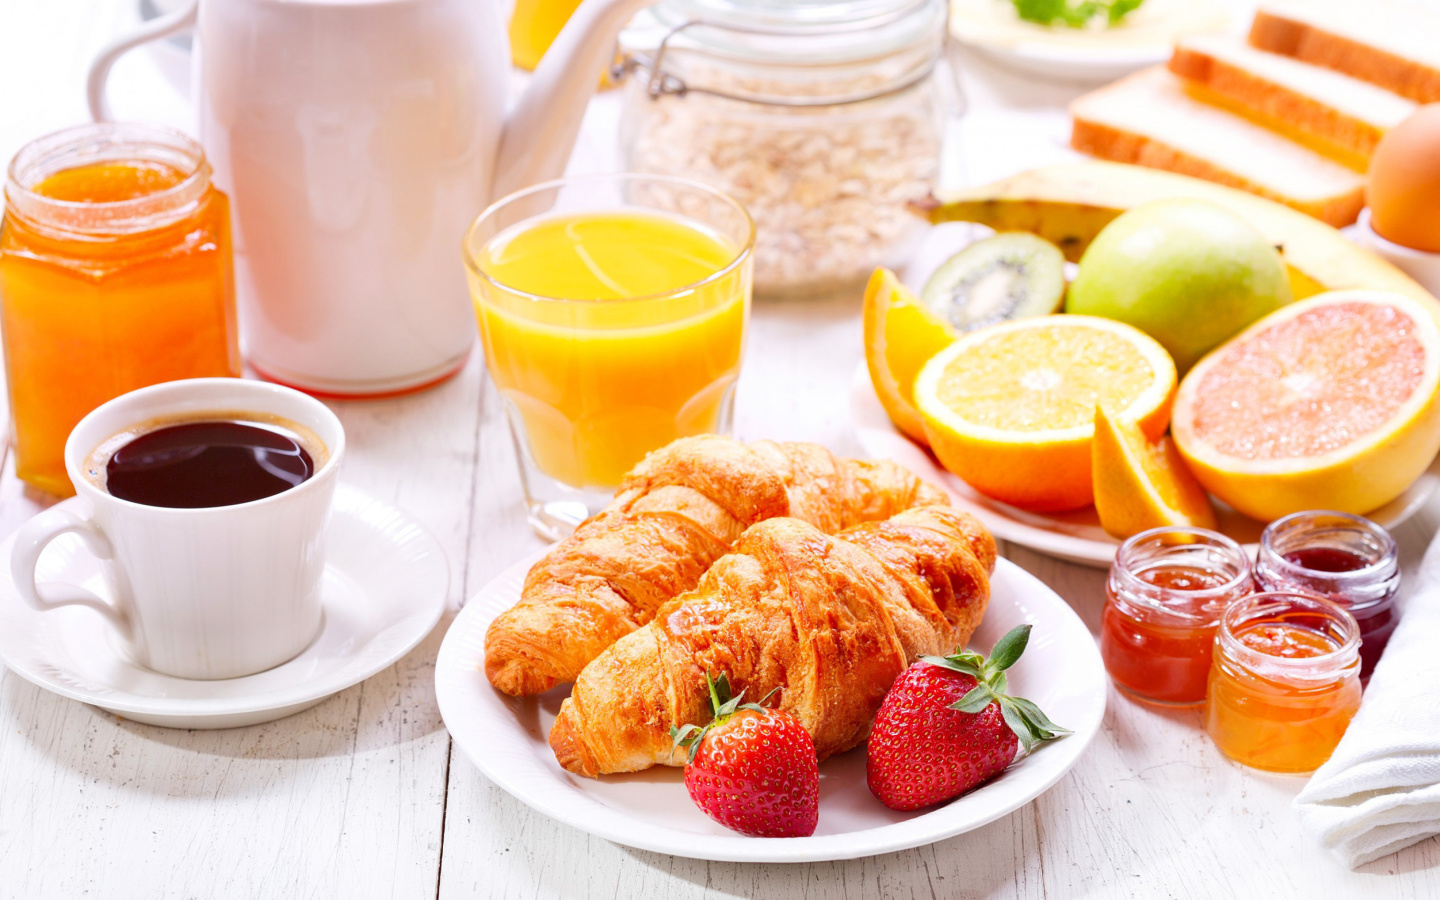 Breakfast with croissants and fruit screenshot #1 1440x900